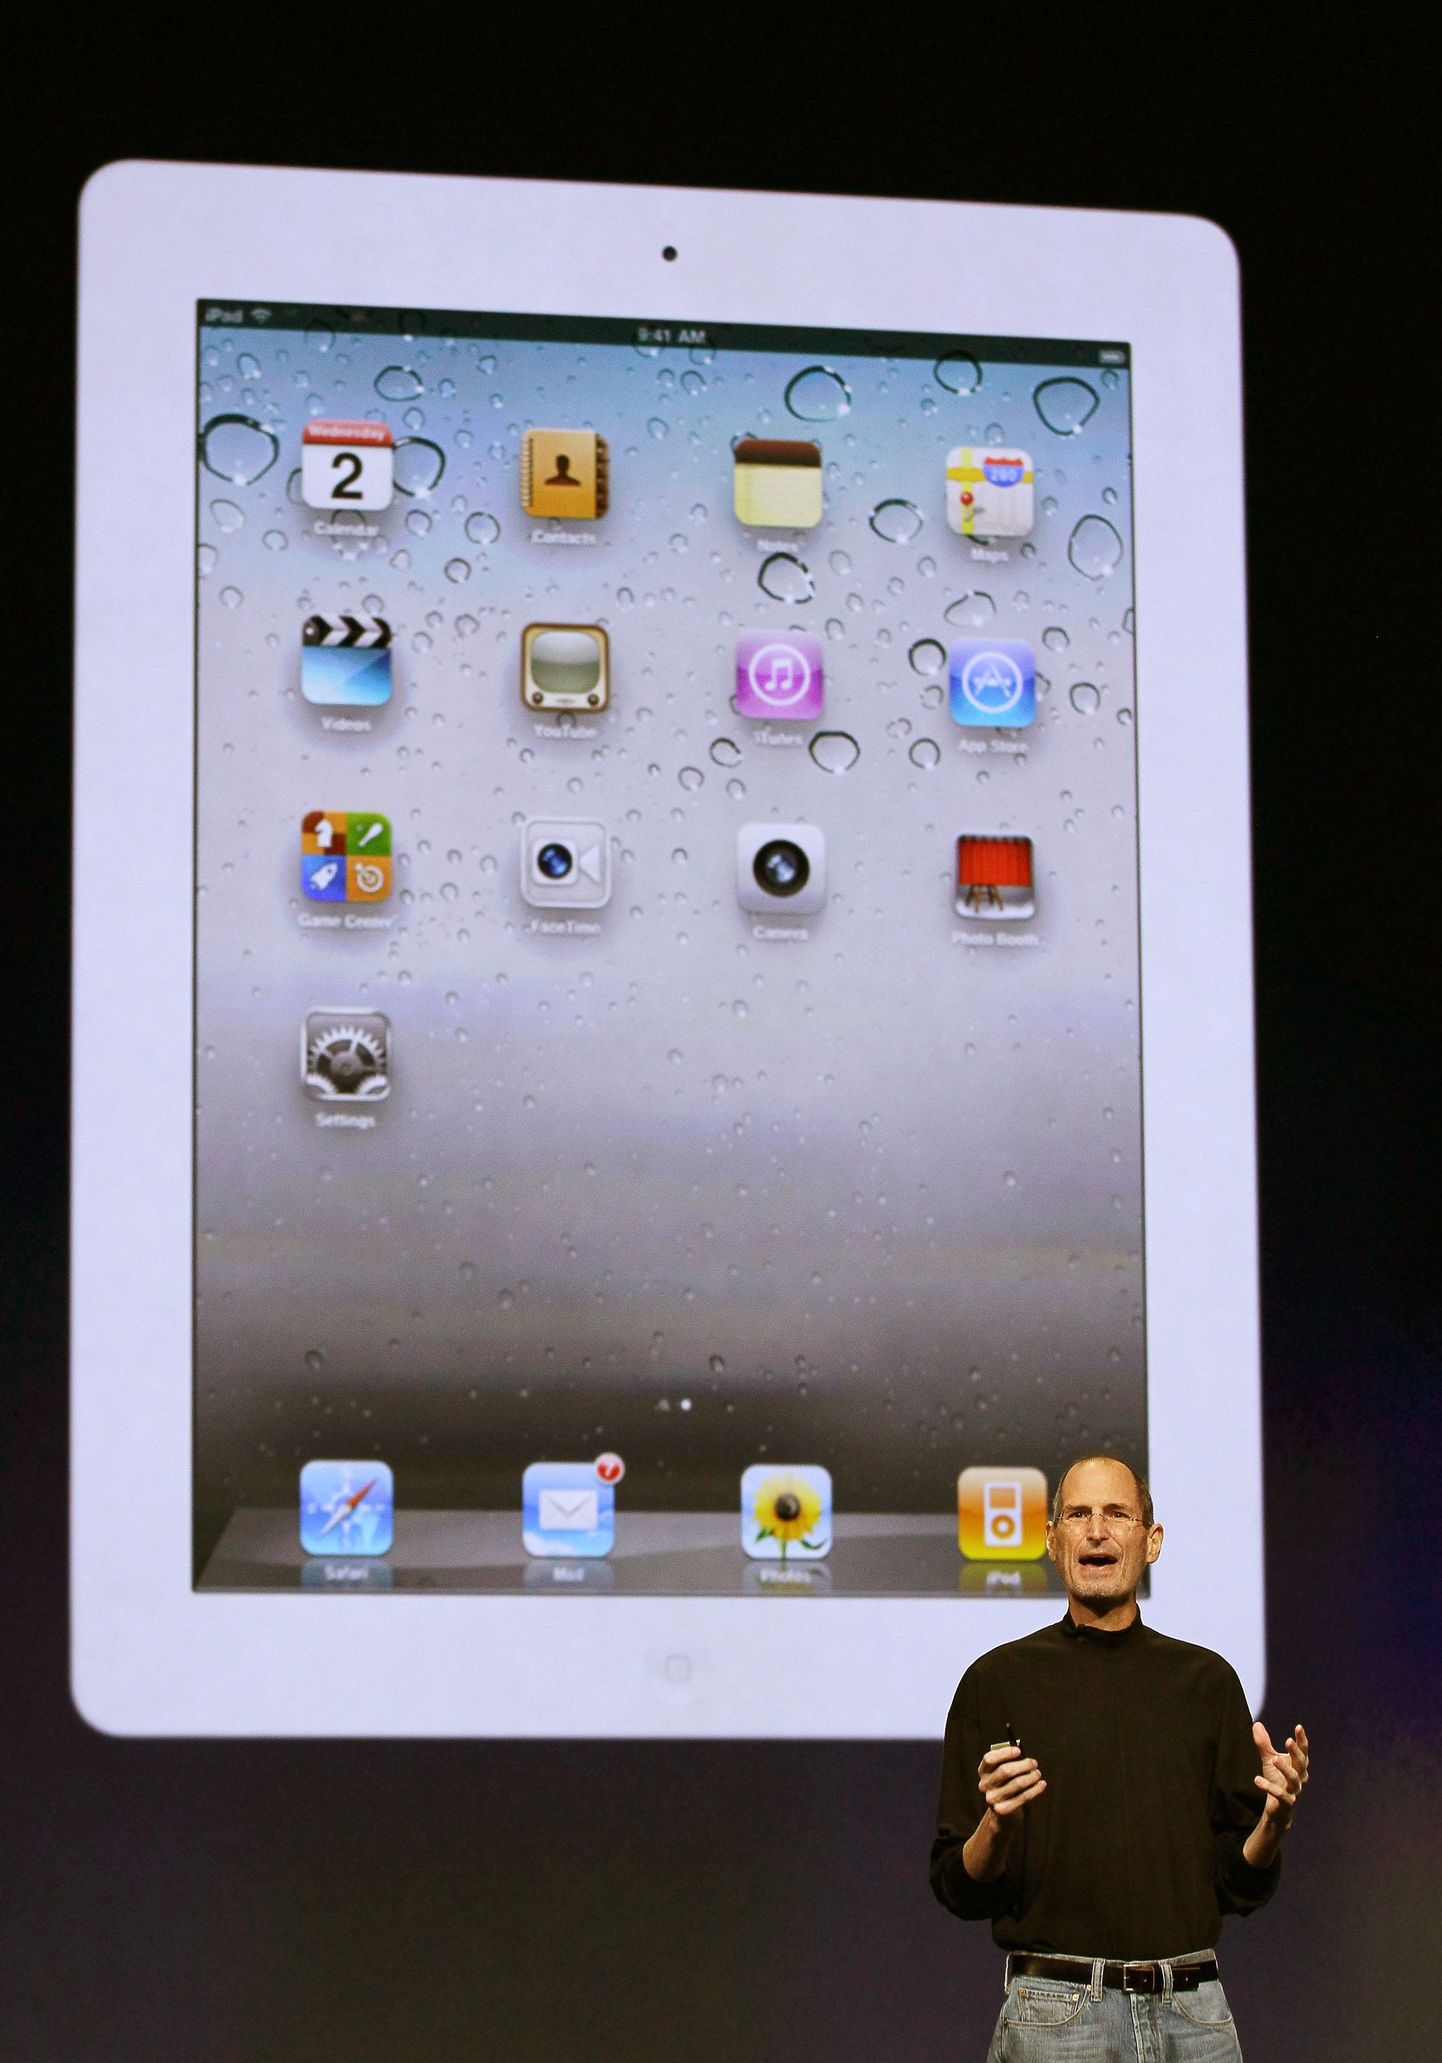 SAN FRANCISCO, CA - MARCH 02: Apple CEO Steve Jobs speaks during an Apple Special event to unveil the new iPad 2 at the Yerba Buena Center for the Arts on March 2, 2011 in San Francisco, California. Apple unveiled the iPad 2 as the successor to its popular tablet, the iPad.   Justin Sullivan/Getty Images/AFP